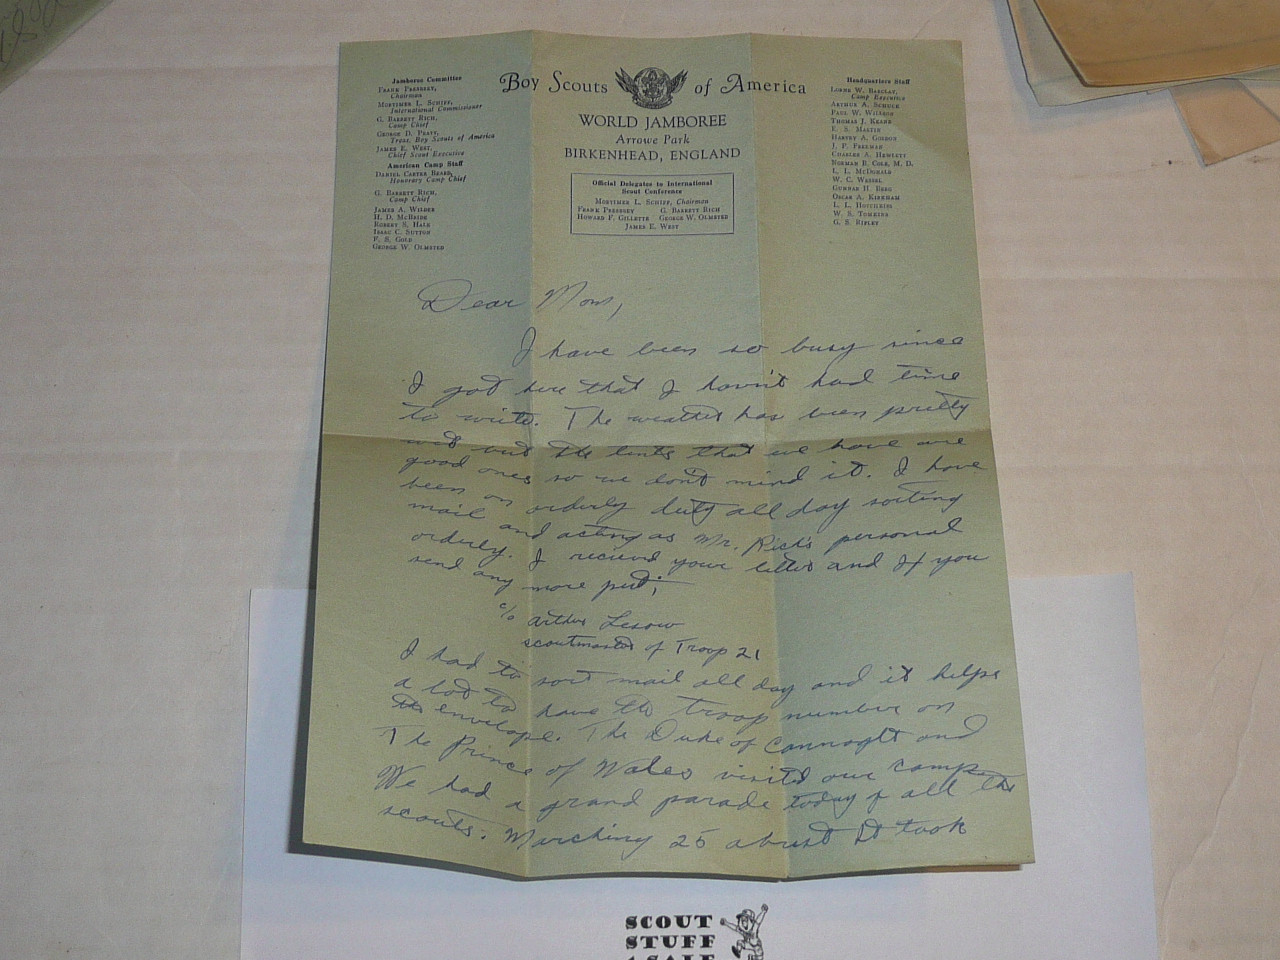 1929 World Jamboree, Letter Home from USA/BSA Contingent Member on Contingent Stationary